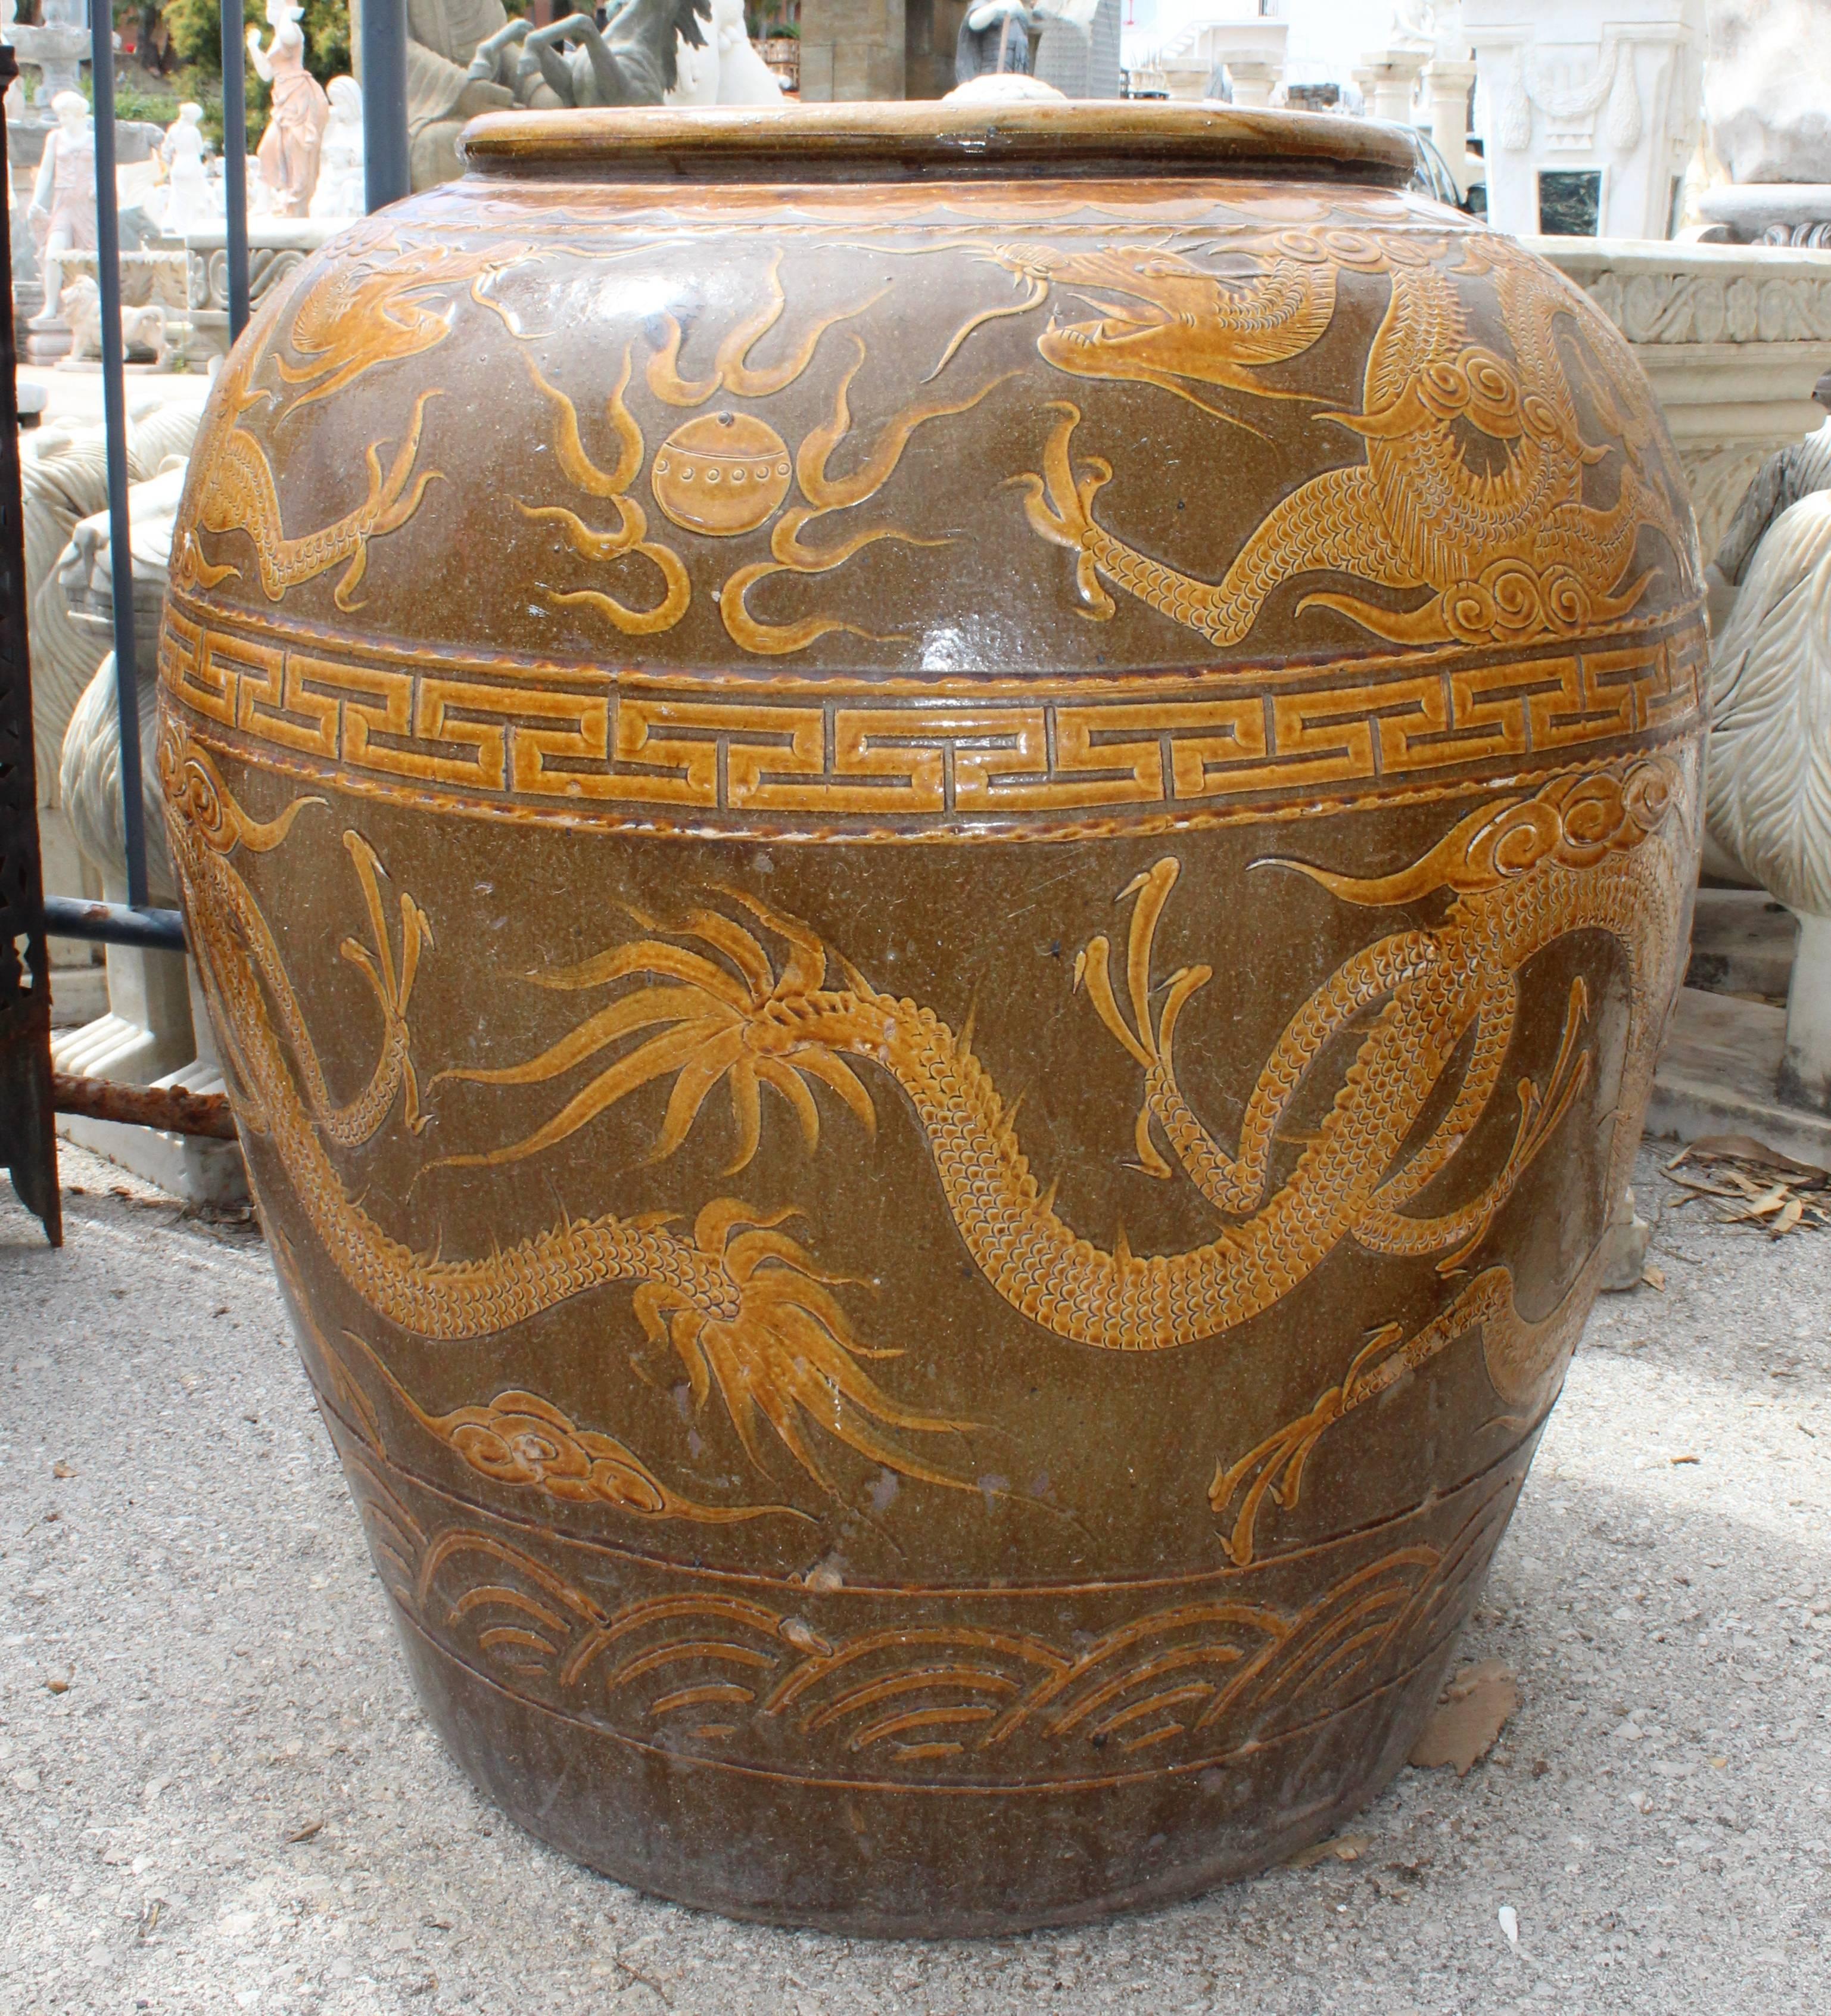 Antique glazed ceramic planter from the early 20th century representing classical oriental dragons.
  